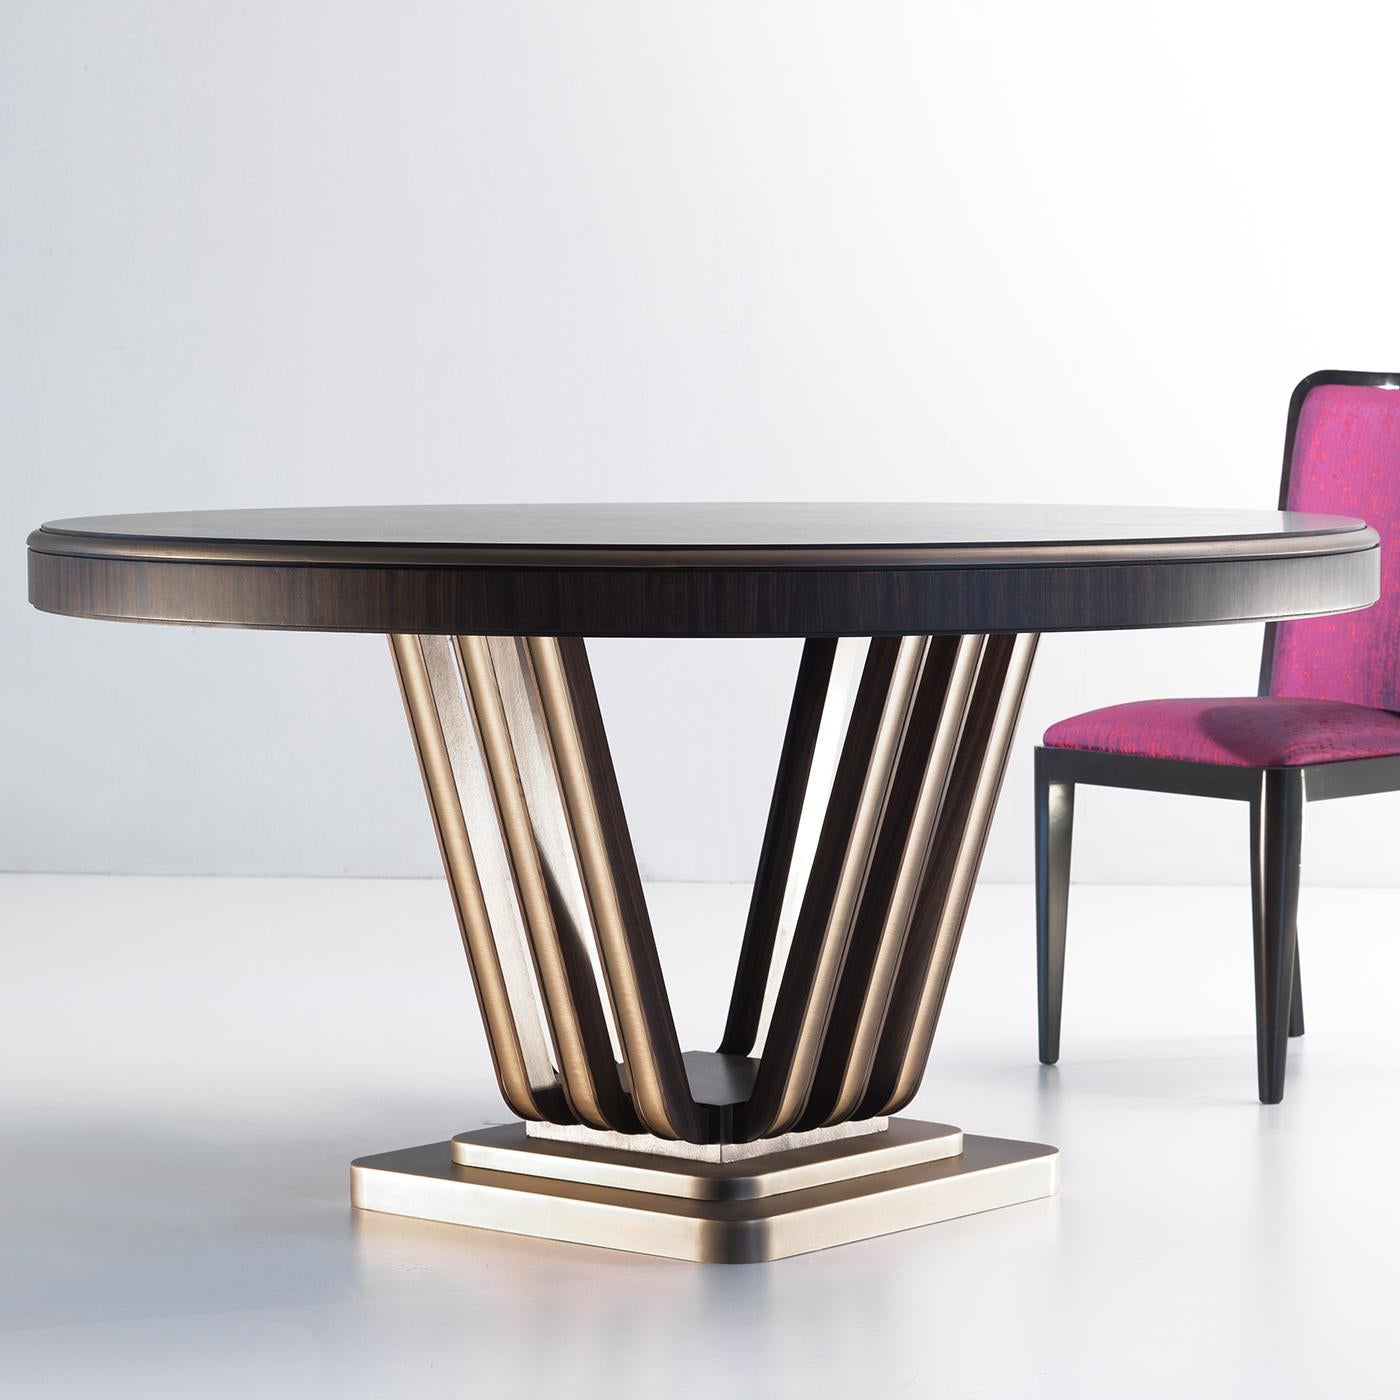 Bold volumes following elegant paths. The striking design marking this imposing dining table blends materials as zebra wood and brass components that lend the table its sober dose of light. The circular top flaunting the wood's typical veining rests